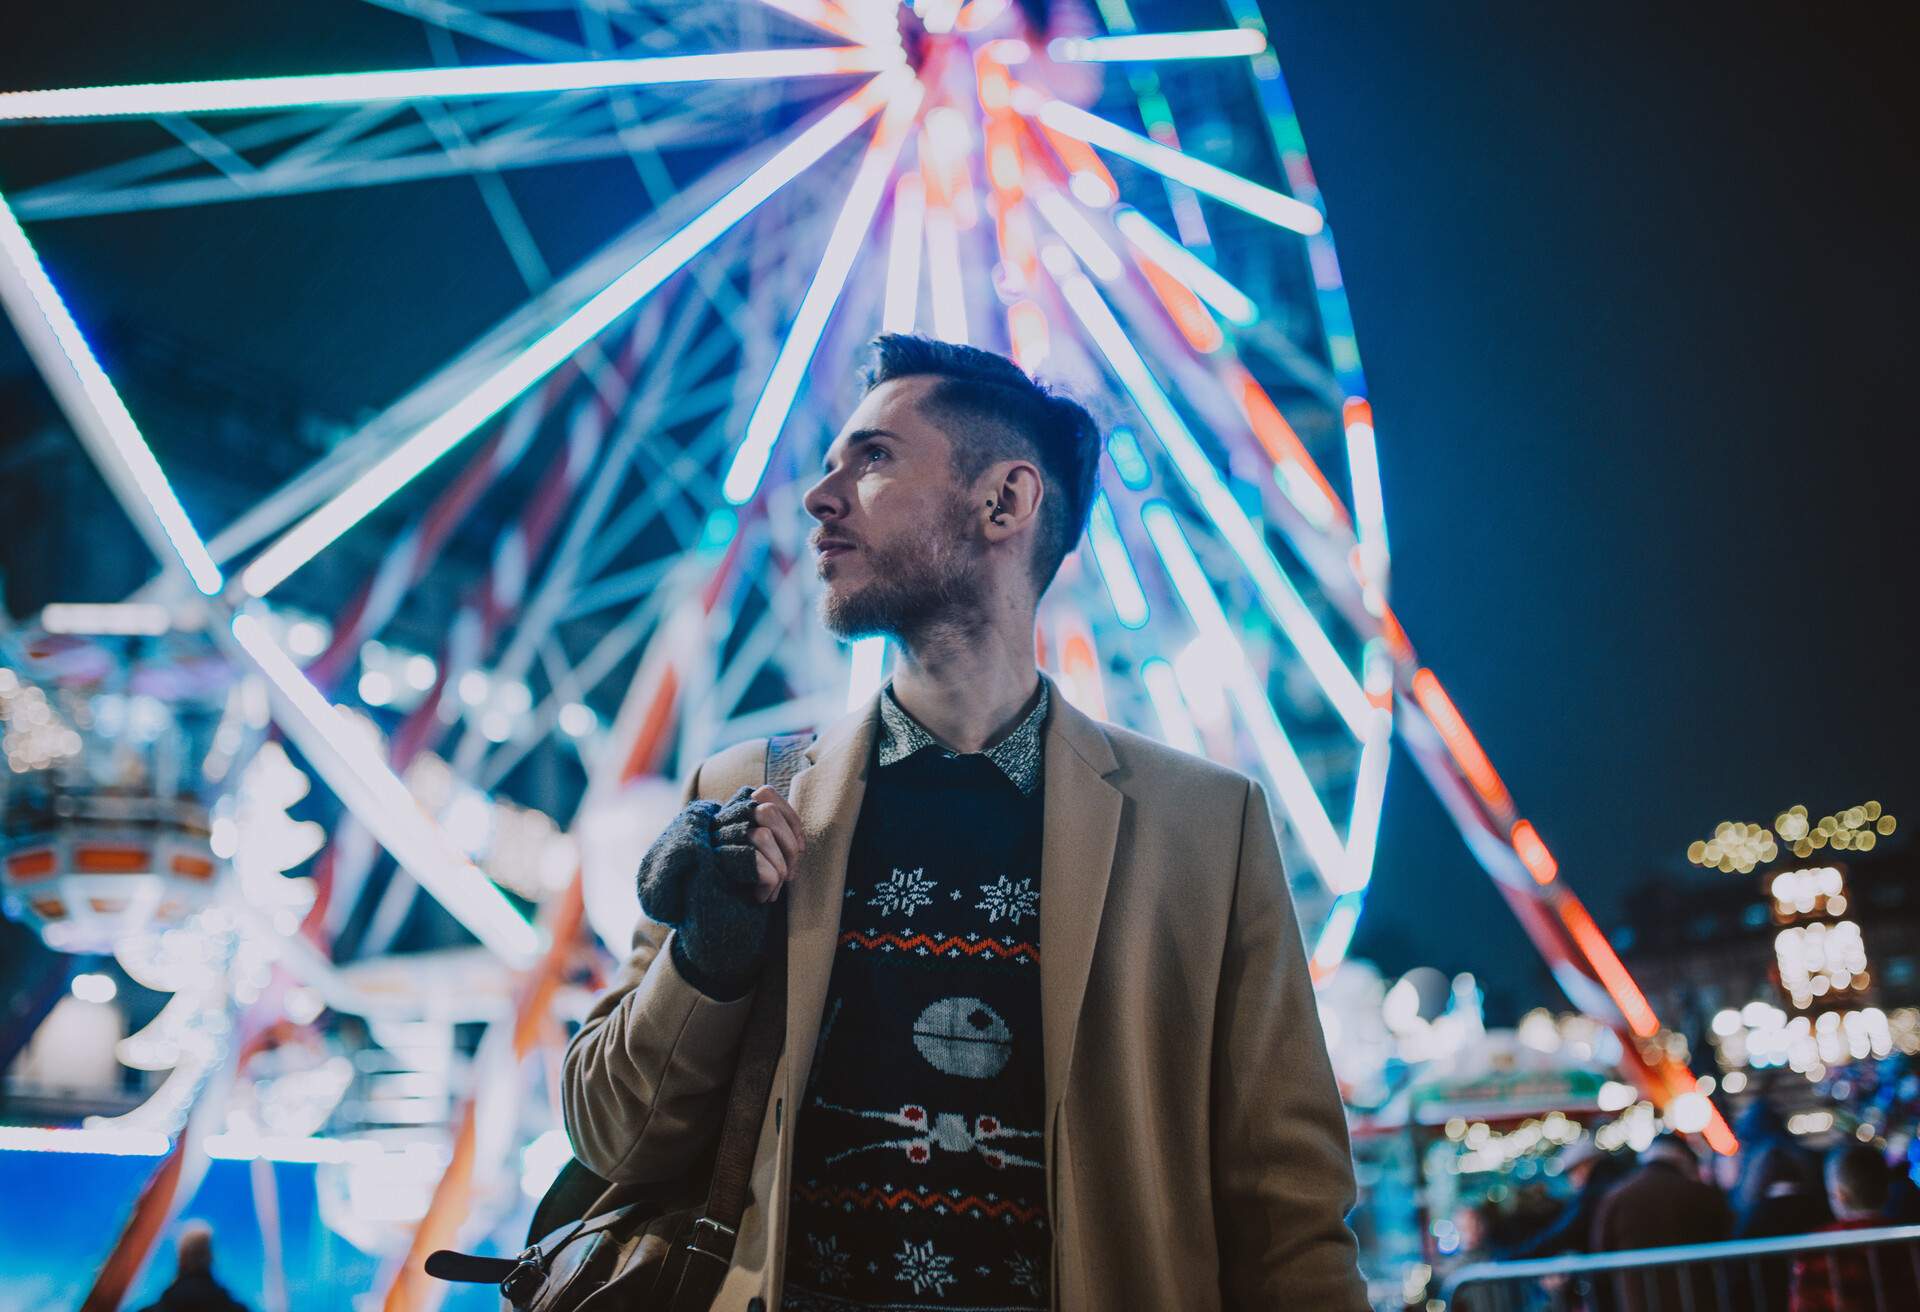 A man in warm clothing stands against a backdrop of a Ferris wheel with bright lights.